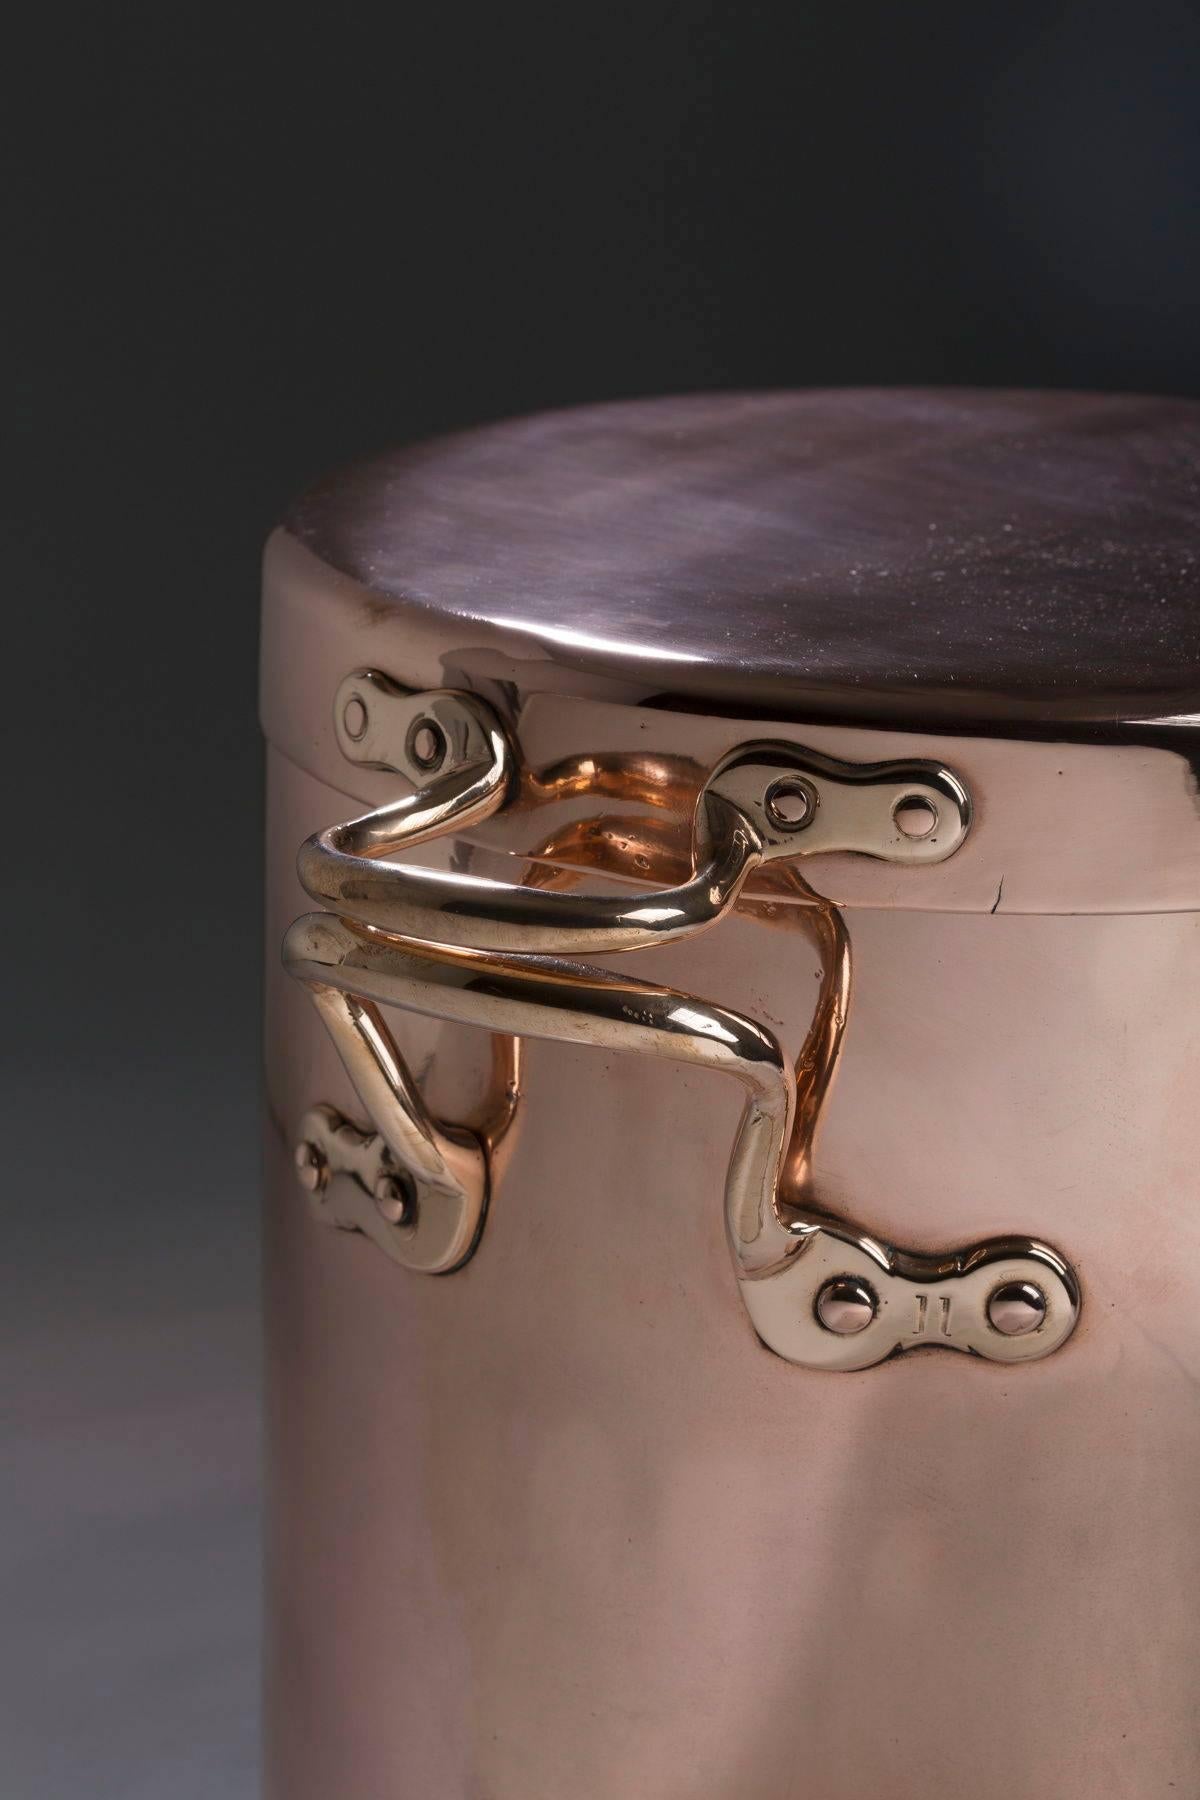 English, copper stock pot with lid handles marked ’11’, 11.5″ diameter, 11.0″ high, circa 1880 dovetailed construction.